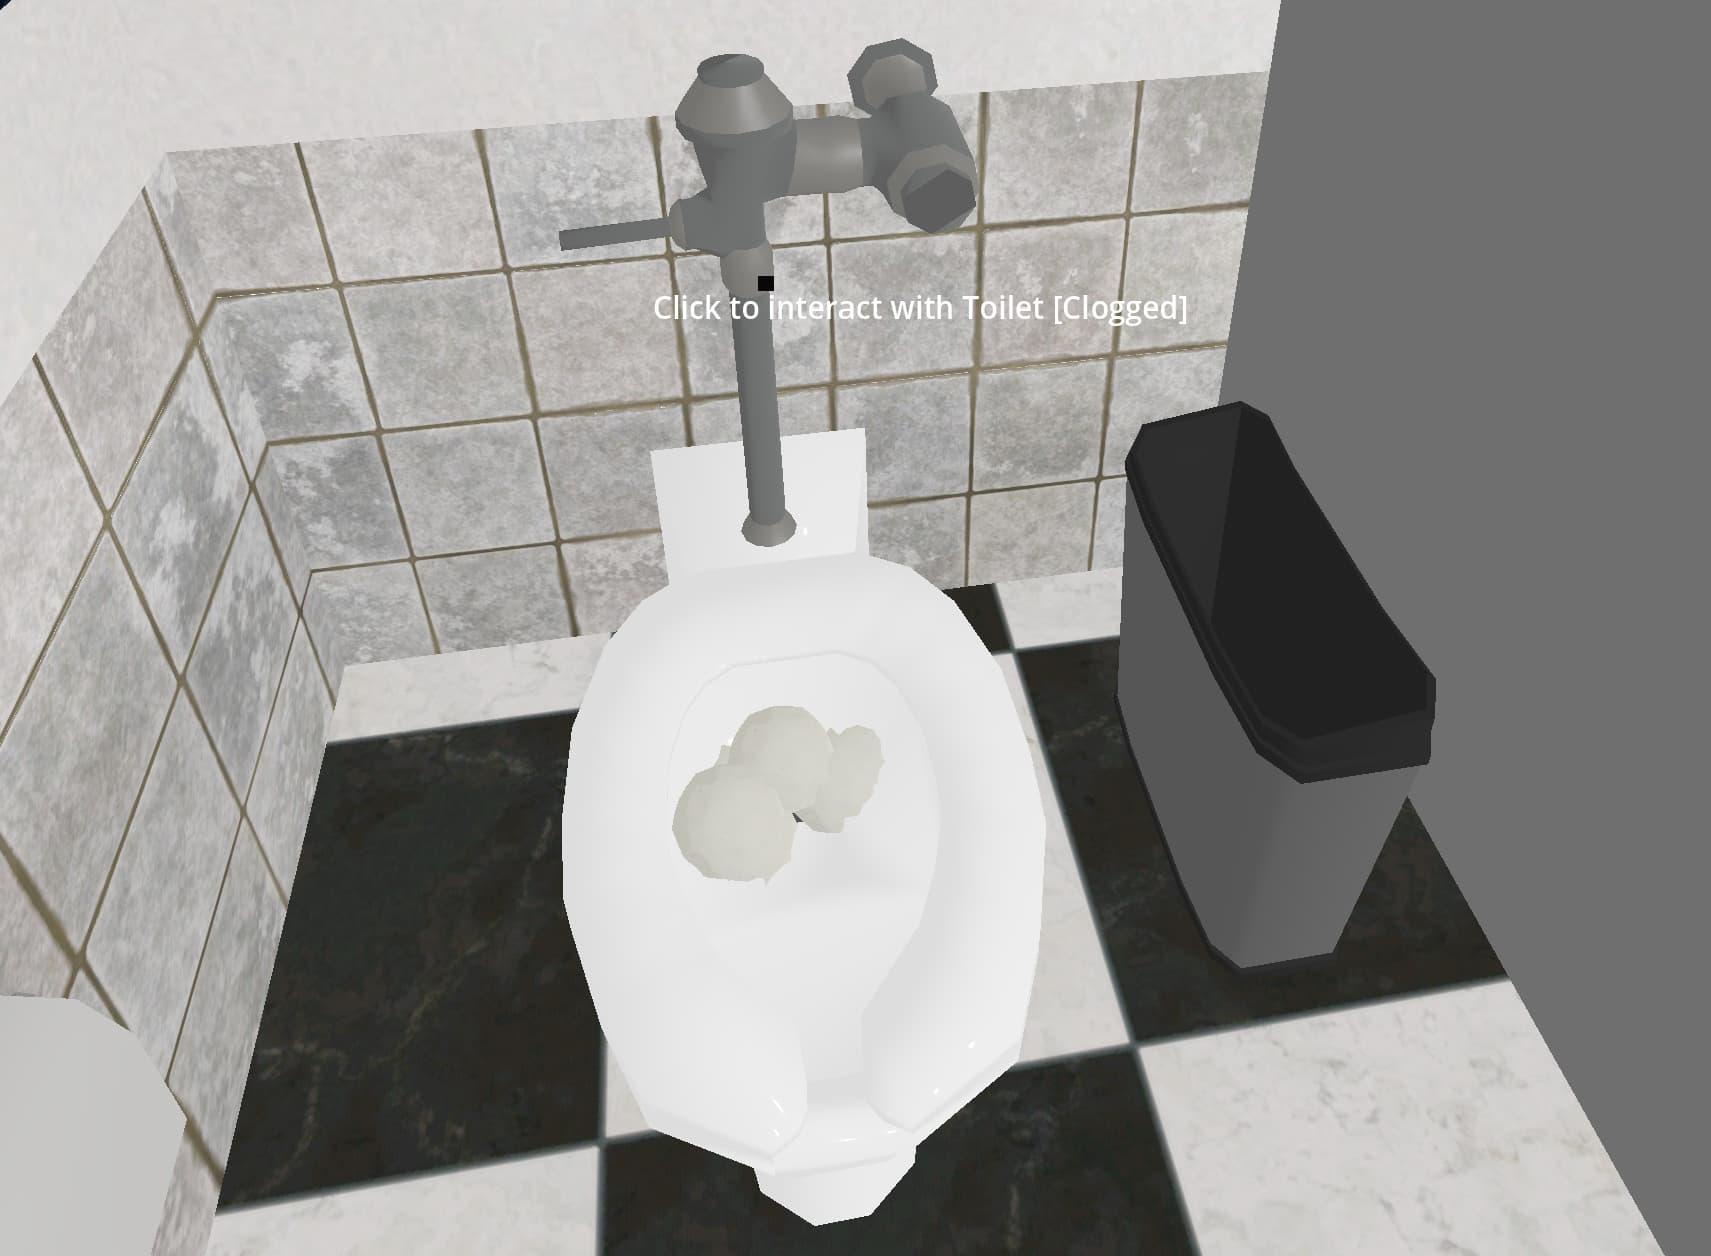 A toilet with several paper towel balls stuck in it, the user interface says it is clogged